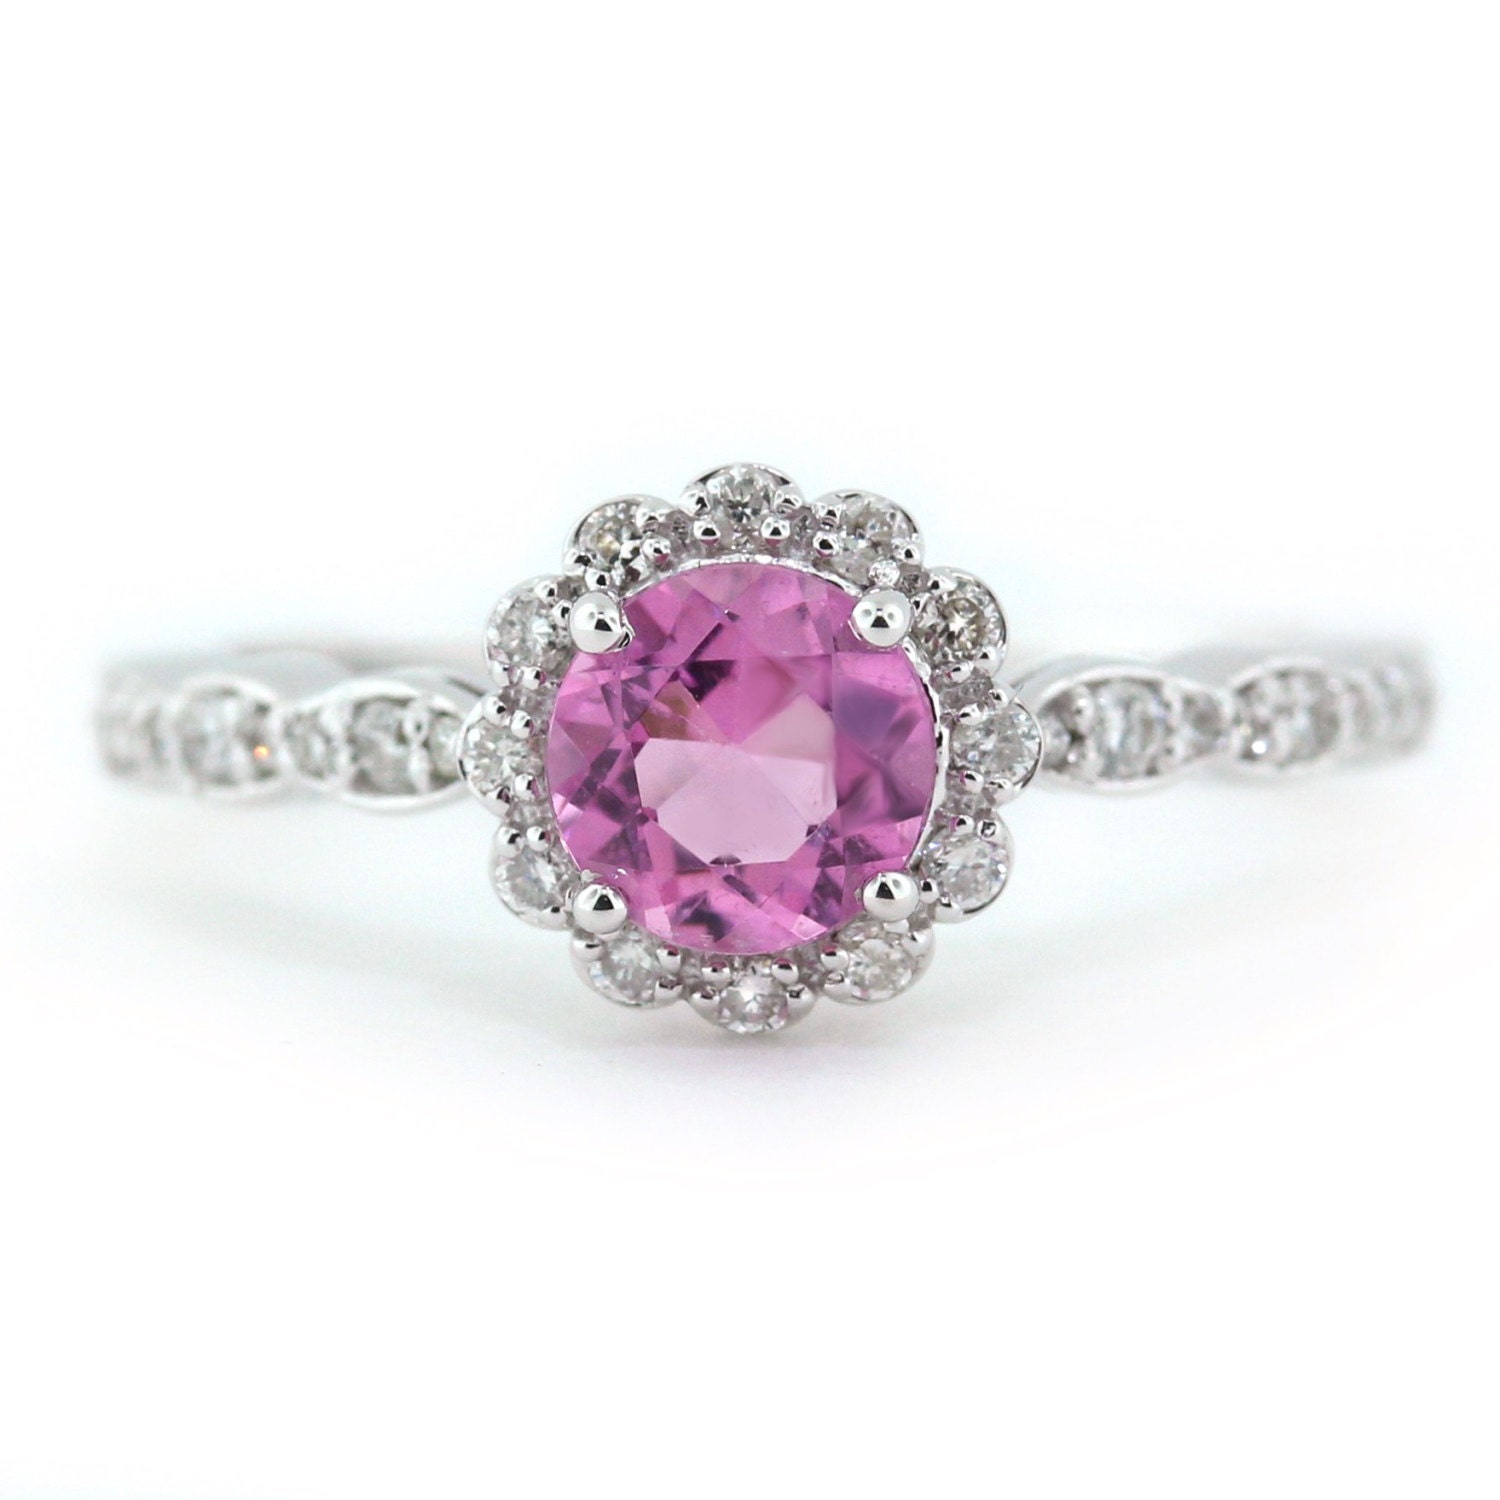 Pink Tourmaline Engagement Ring or Right Hand Ring 14k White